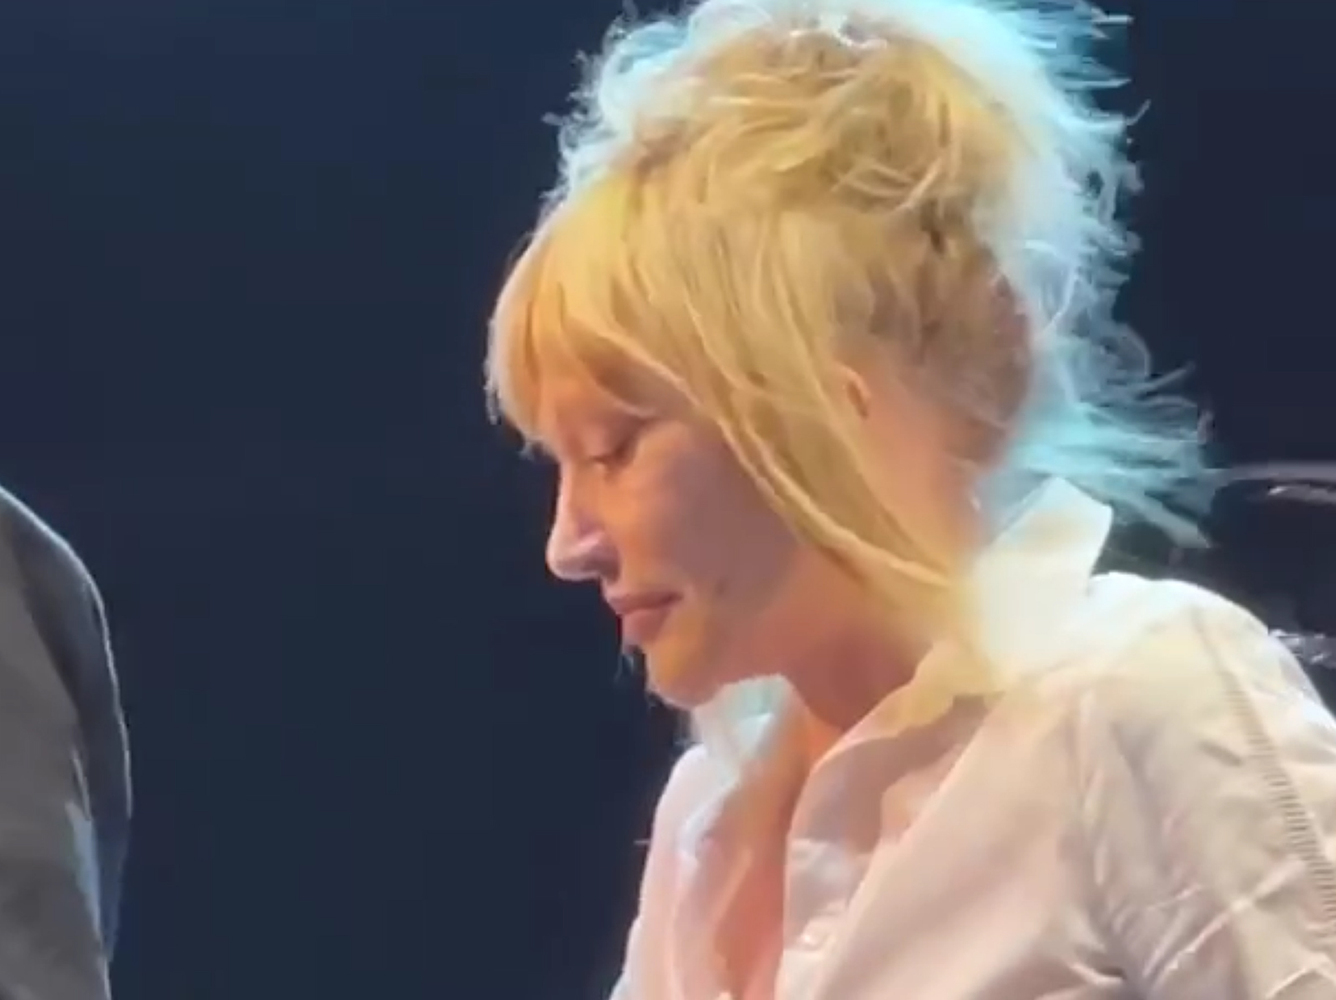 White blouse and wrinkled jeans: Pugacheva came to the concert 